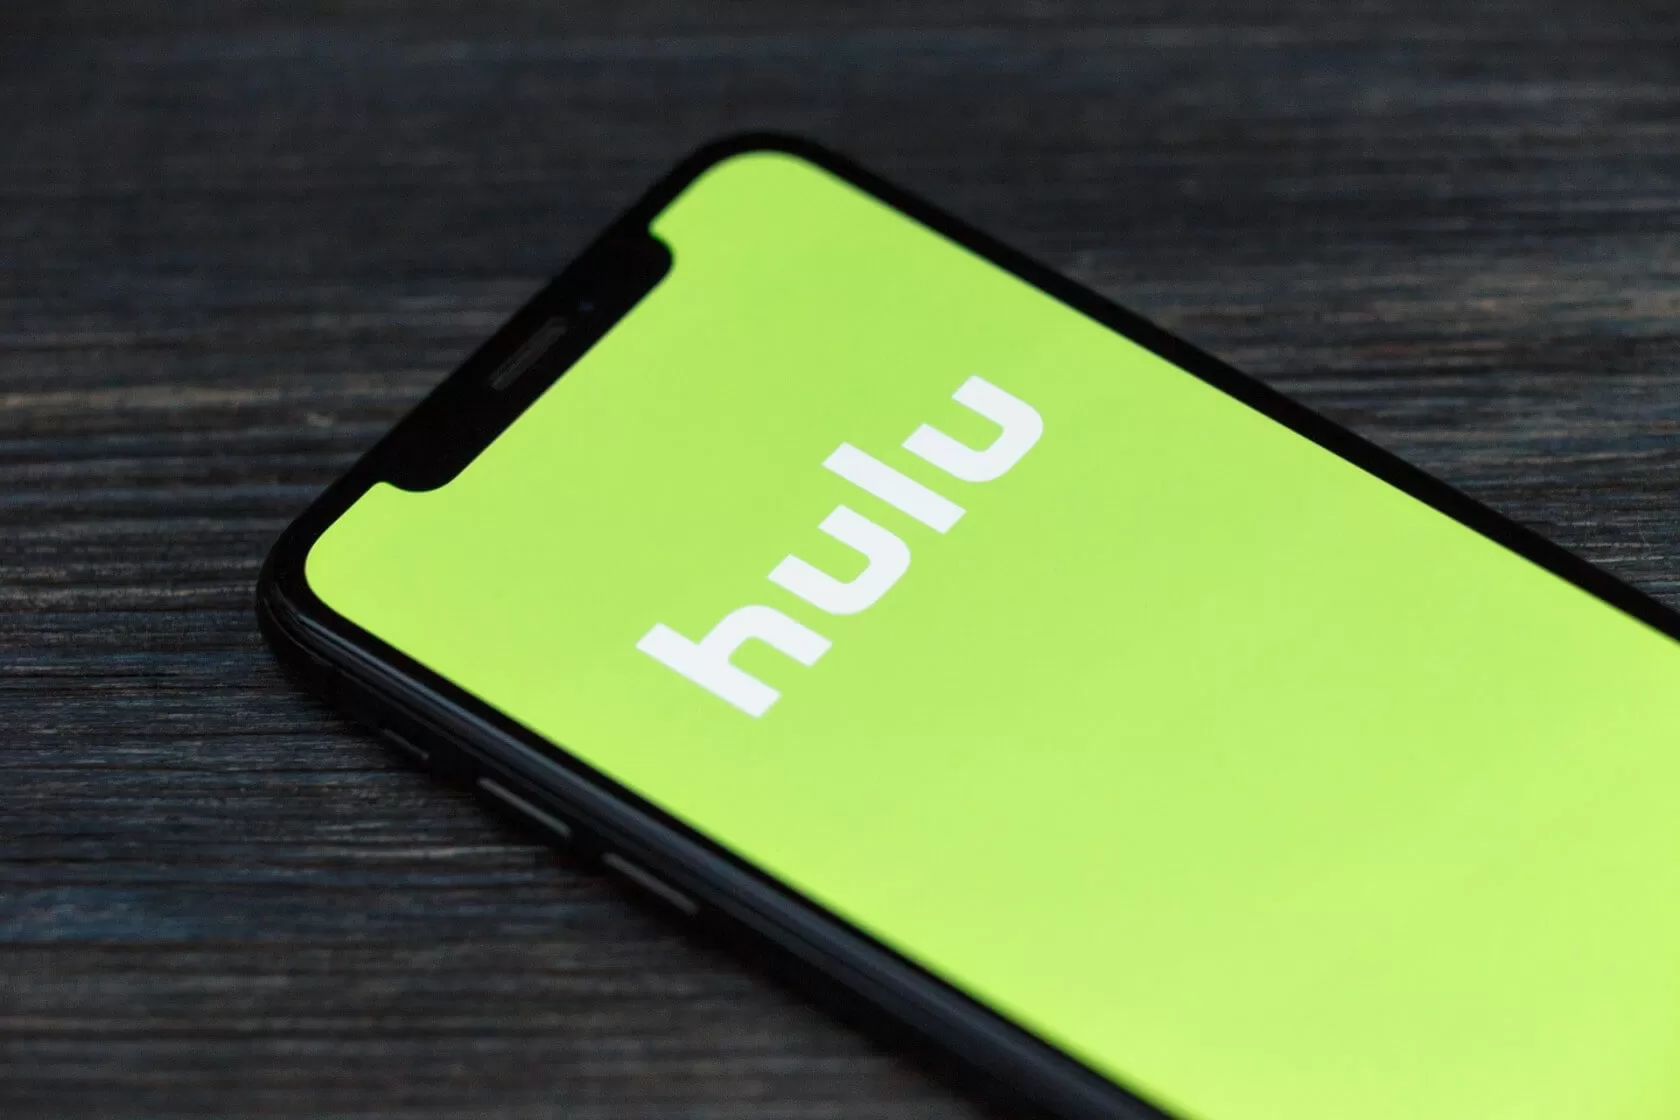 Hulu incentivizes binge viewing sessions with ad-free episodes